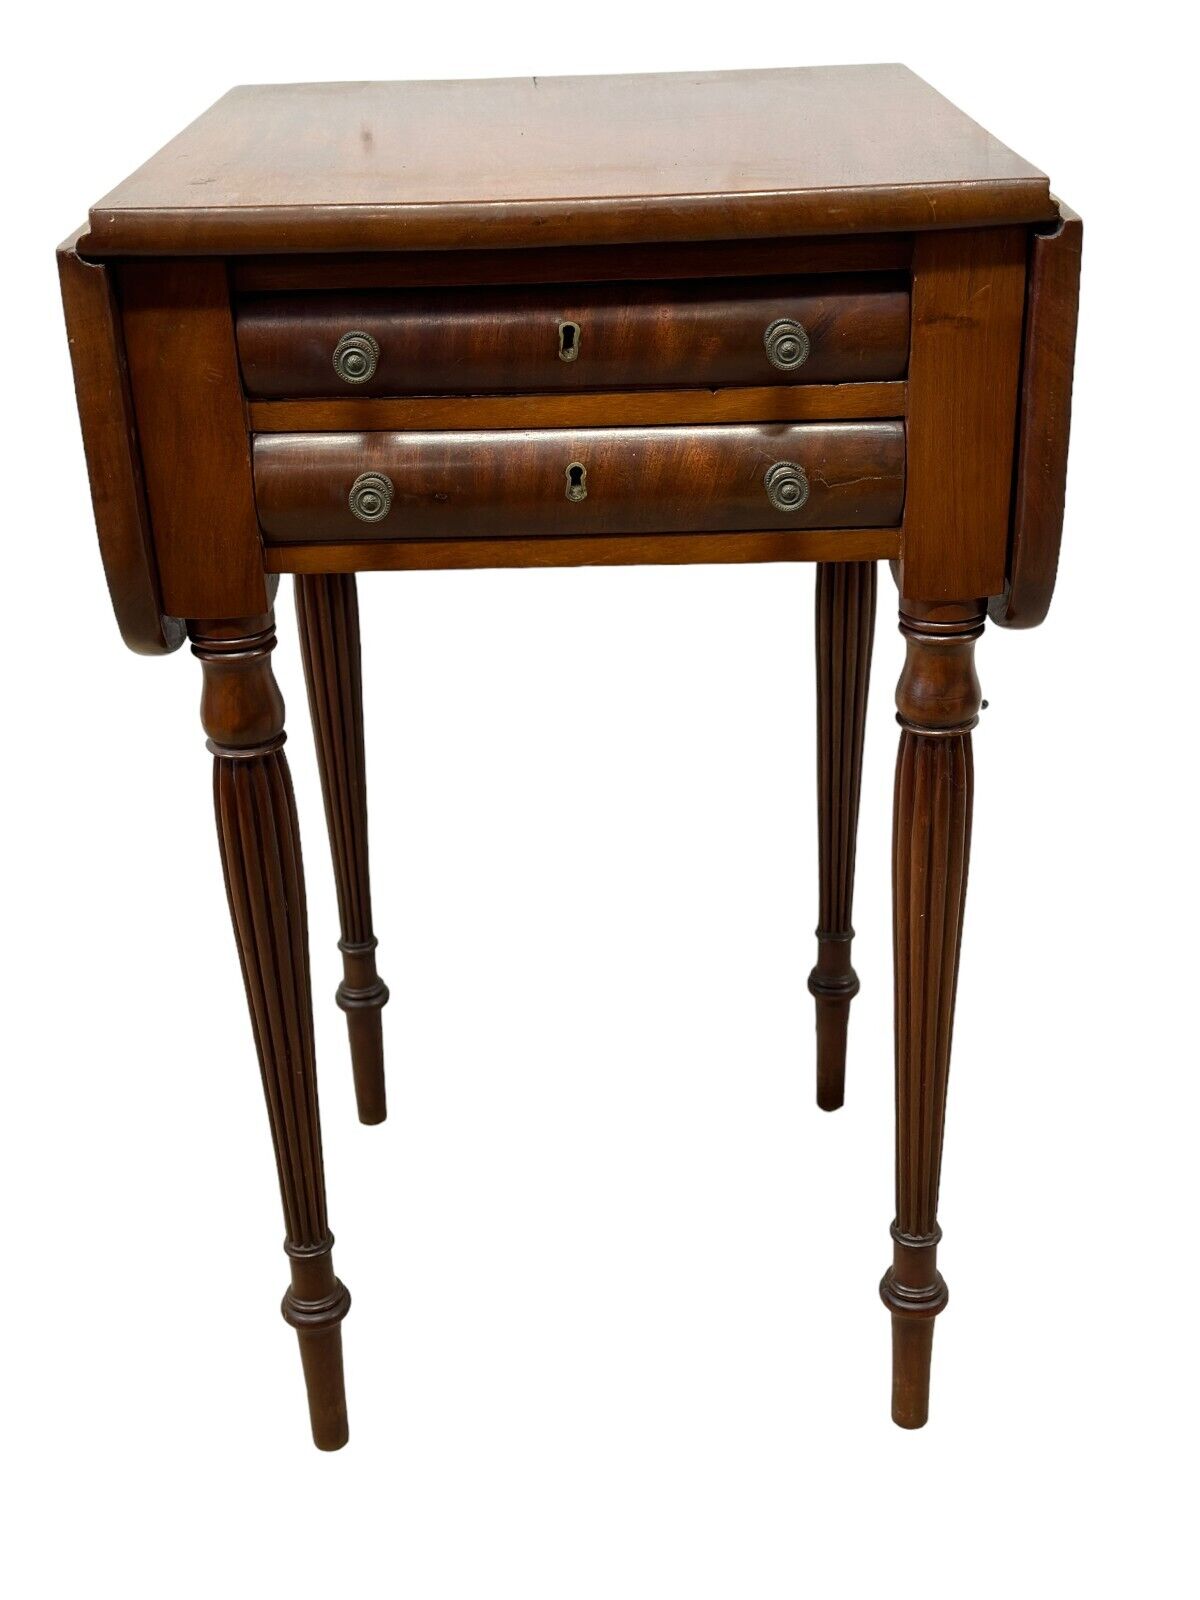 diminutive federal period mahogany 2 drawer table stand reeded legs 1820 fine